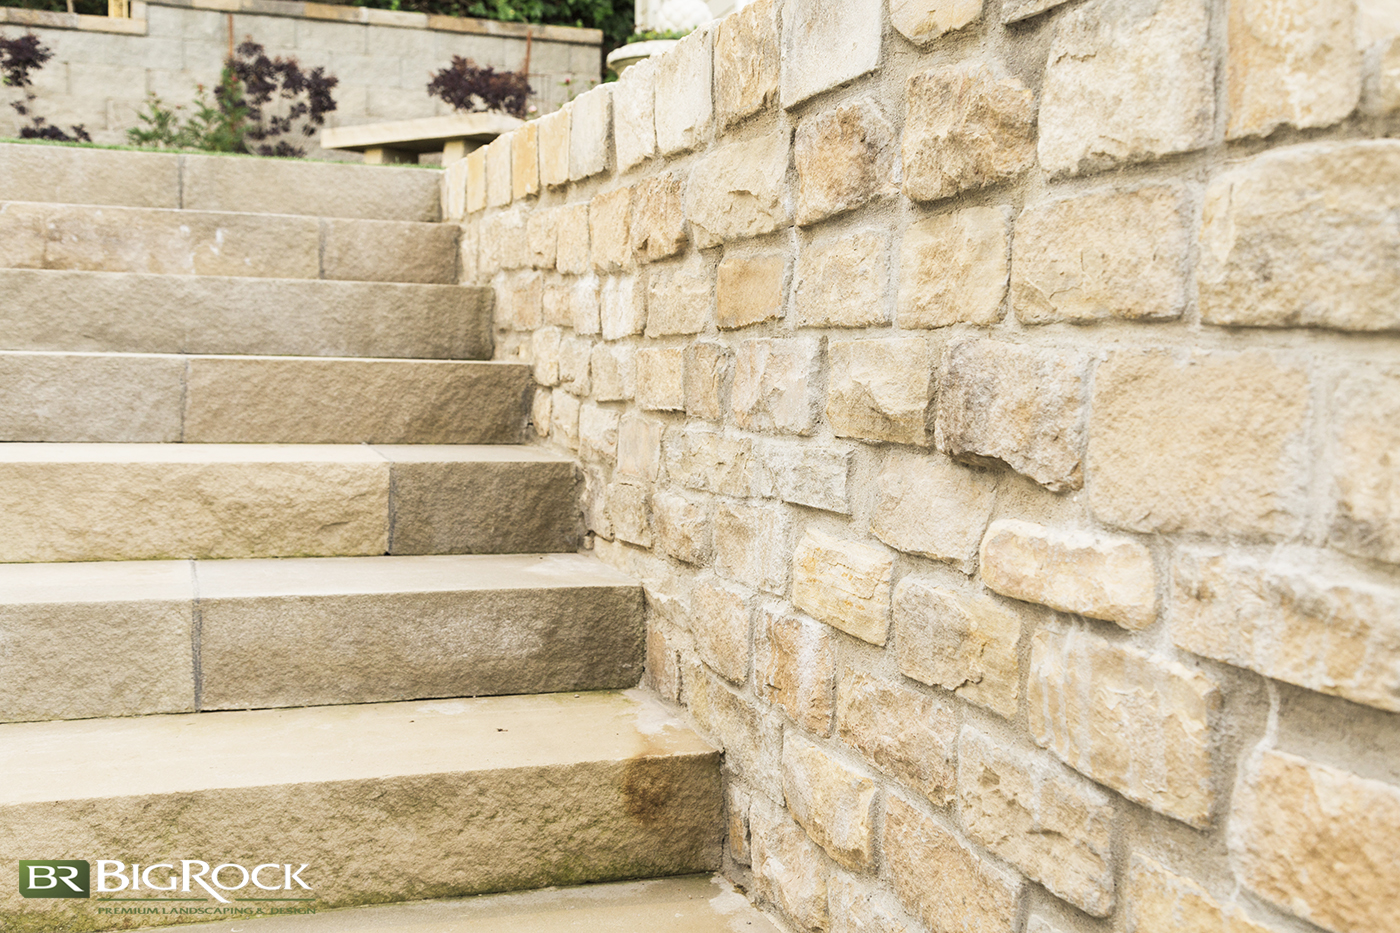 With masonry landscaping projects, it is critical that your contractor installs all aspects of the masonry work properly. Big Rock Landscaping is your masonry experts for residential landscaping.